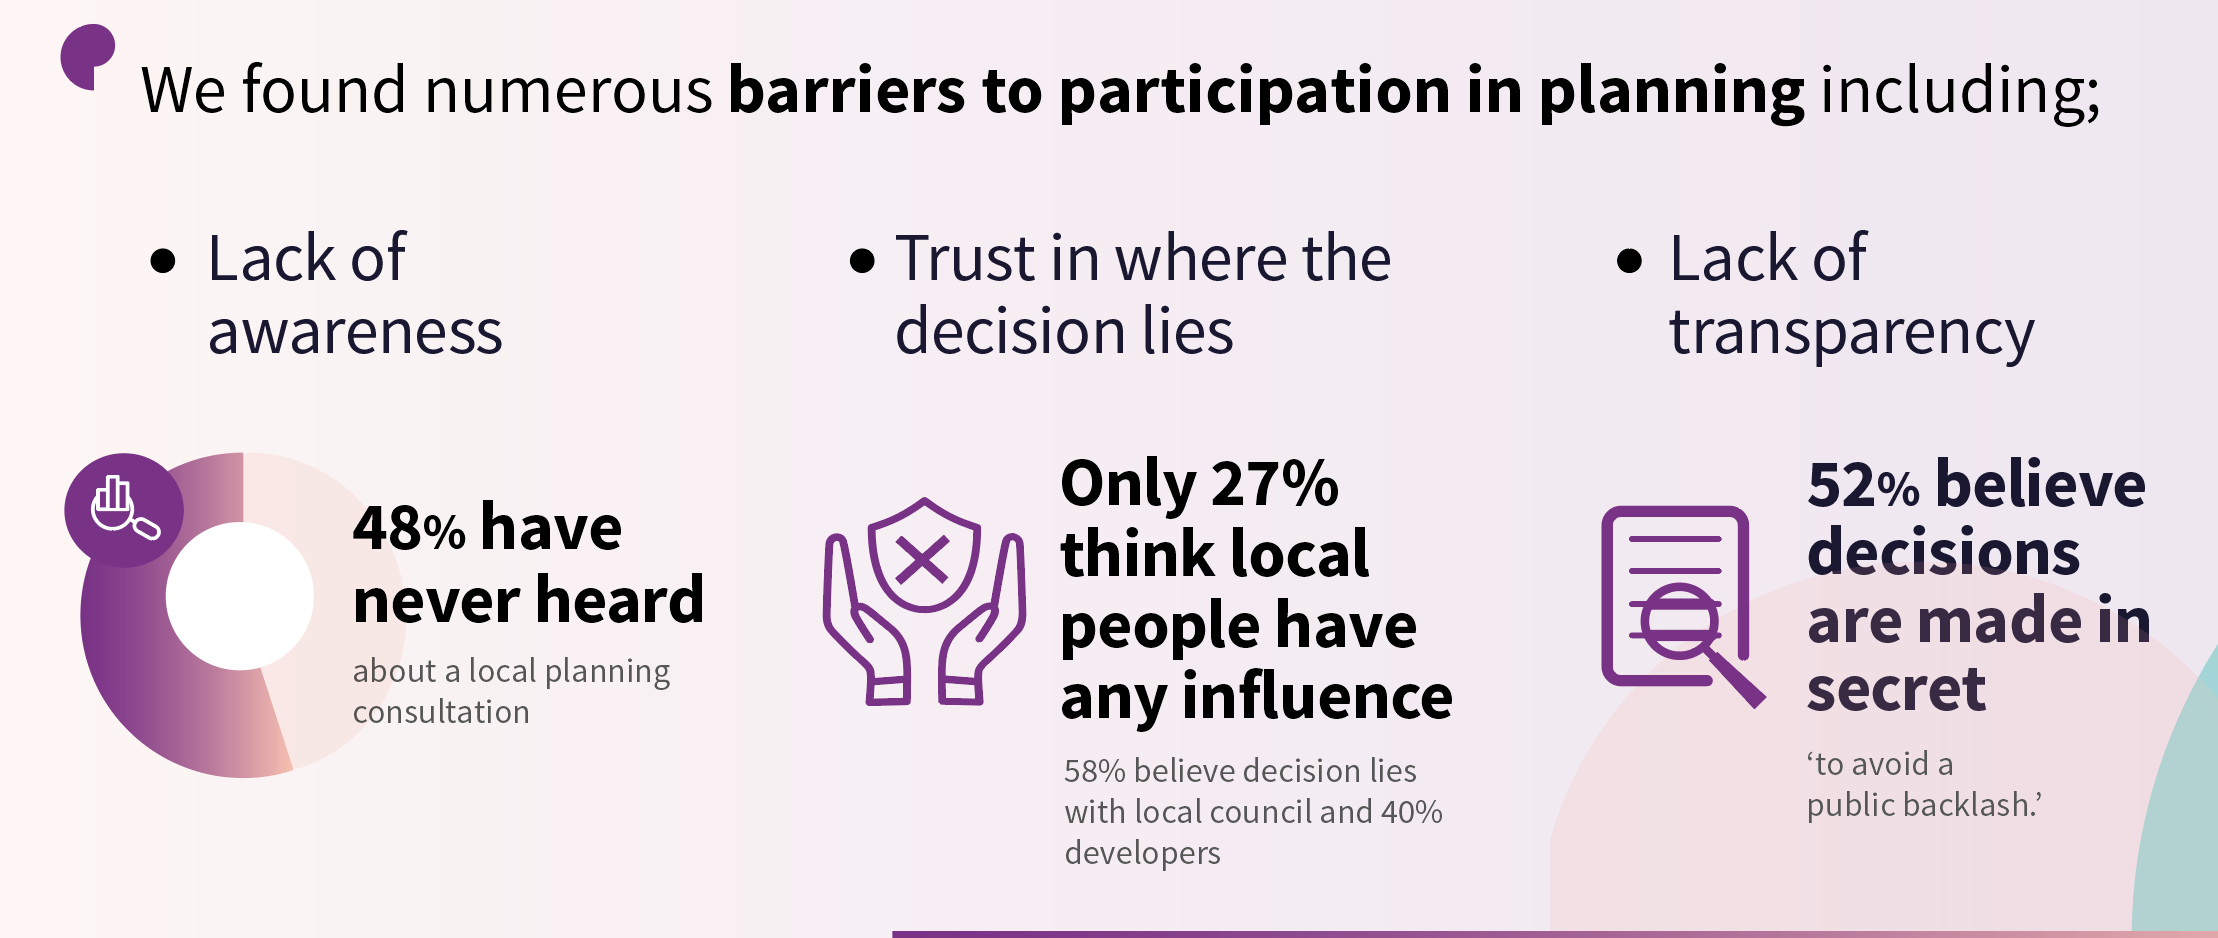 Barriers to partcipation in planning